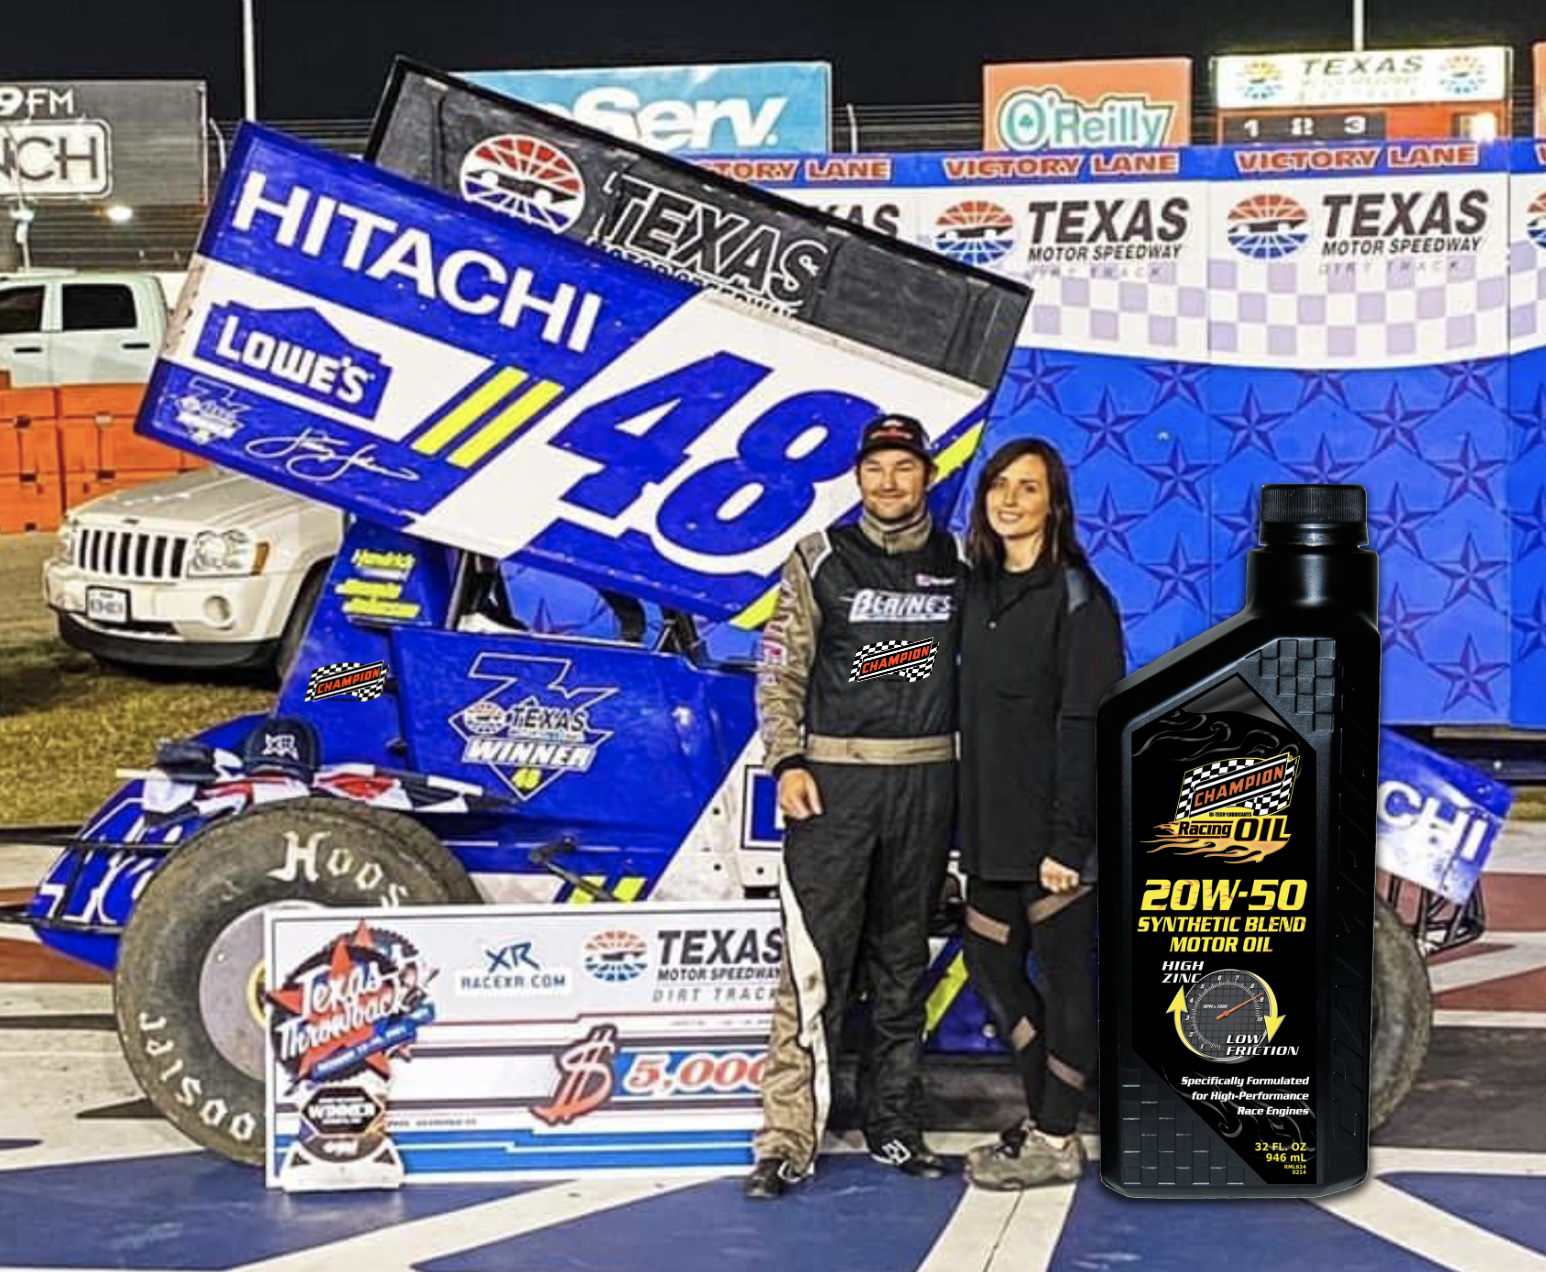 Champion Racing Oil and Roger Crockett Win at Texas Motor Speedway